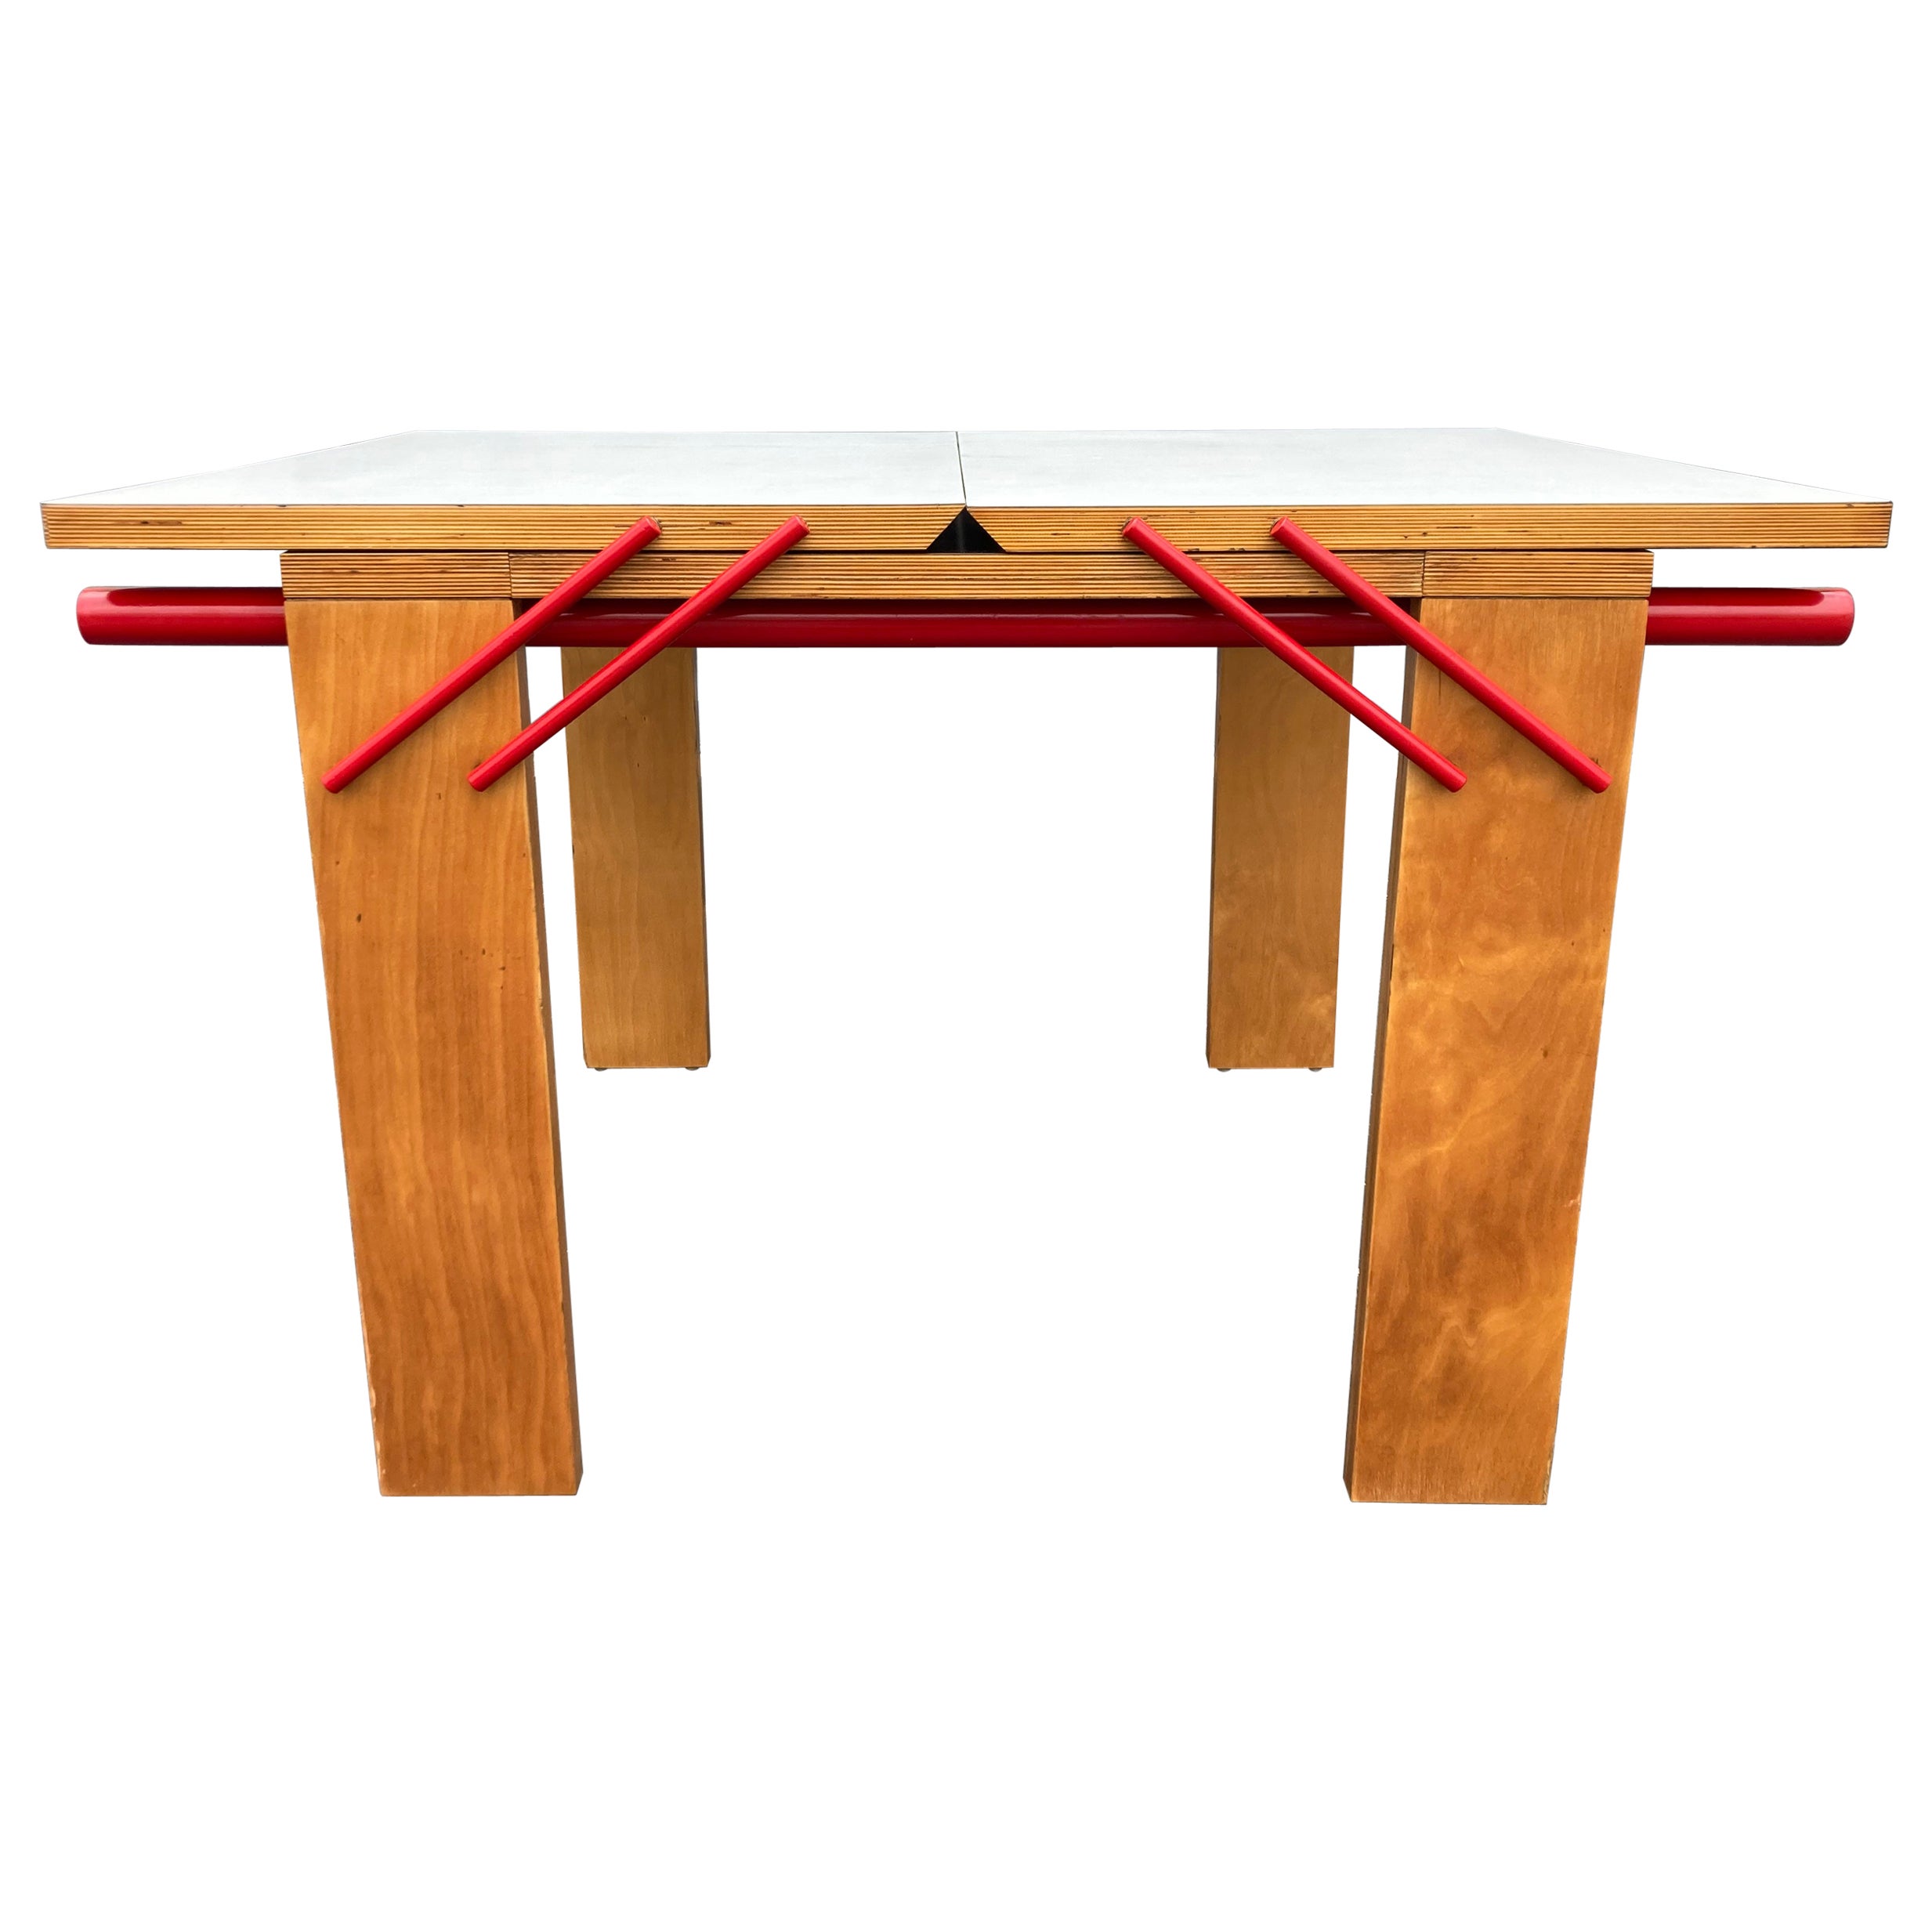 Designer Dining Table, Plywood, Red For Sale